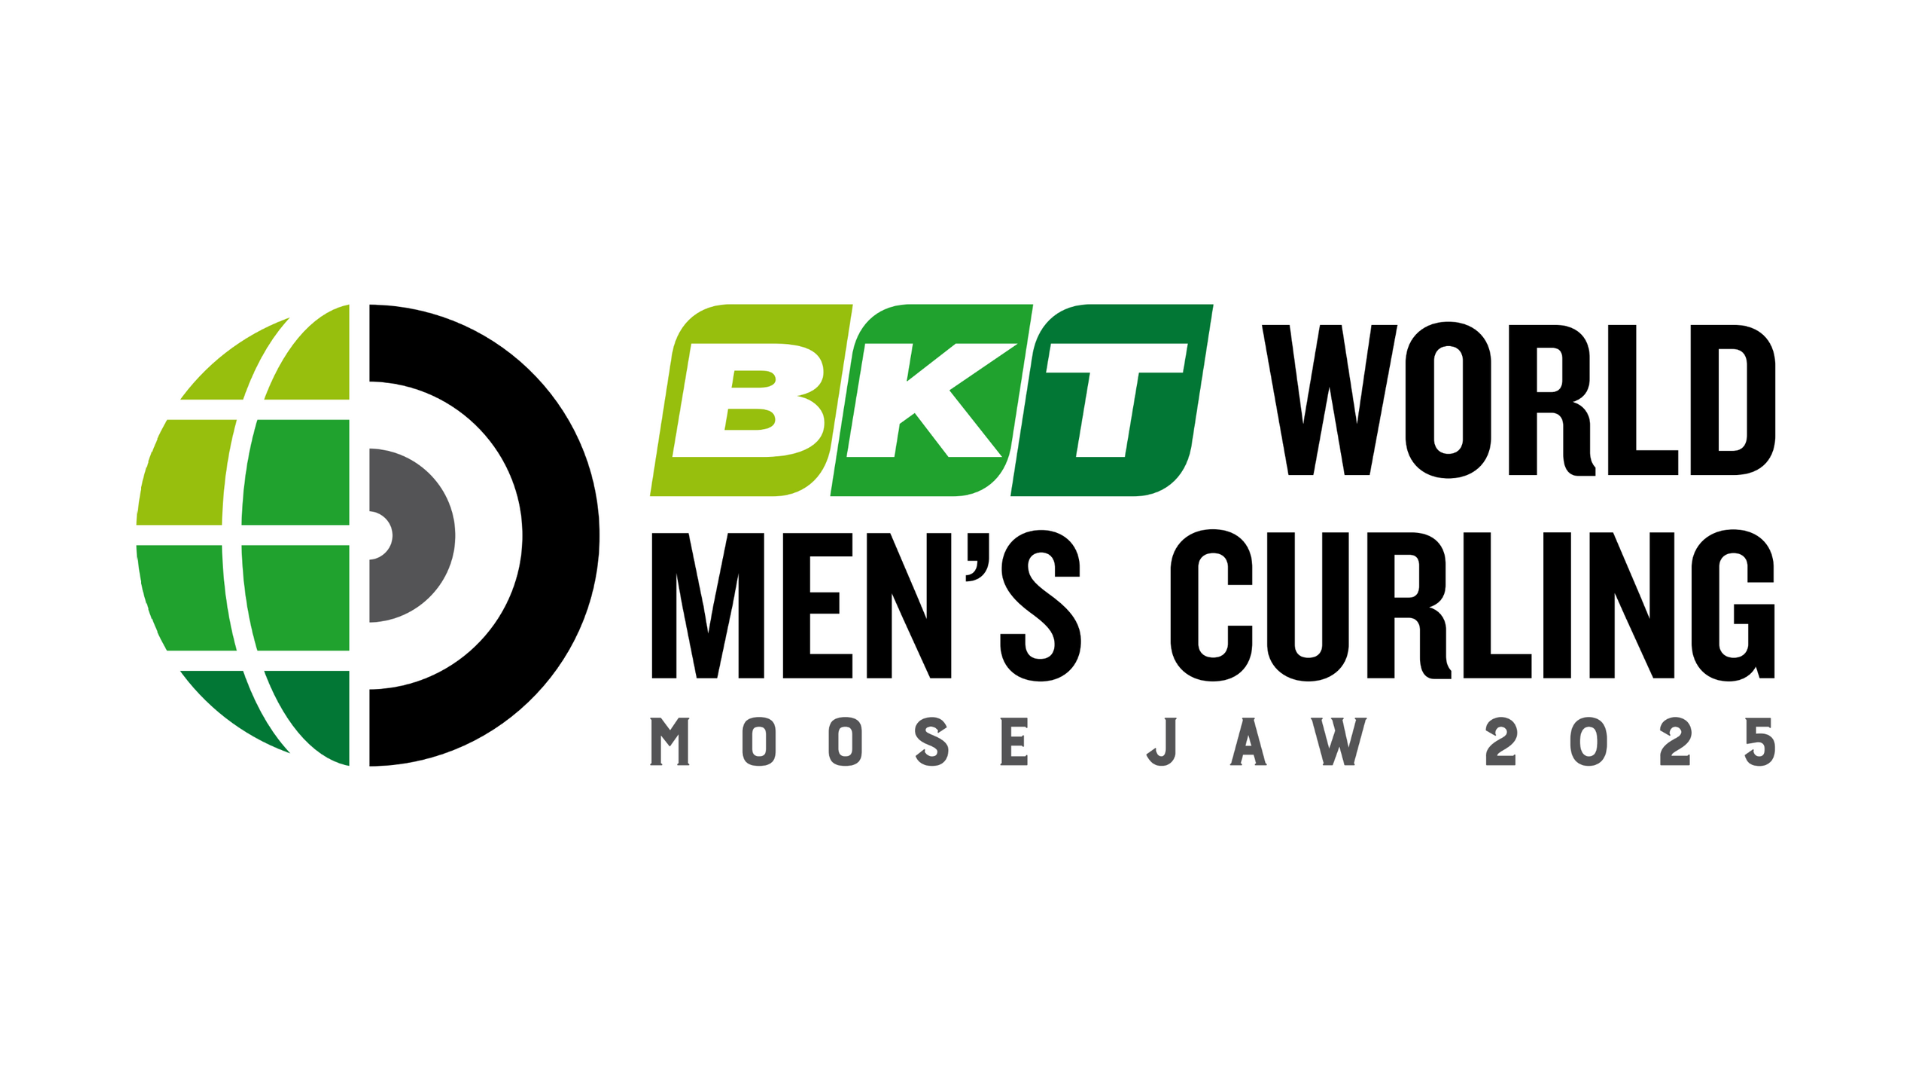 2025 BKT Tires World Men’s Curling Championship to be played at the Moose Jaw Events Centre 